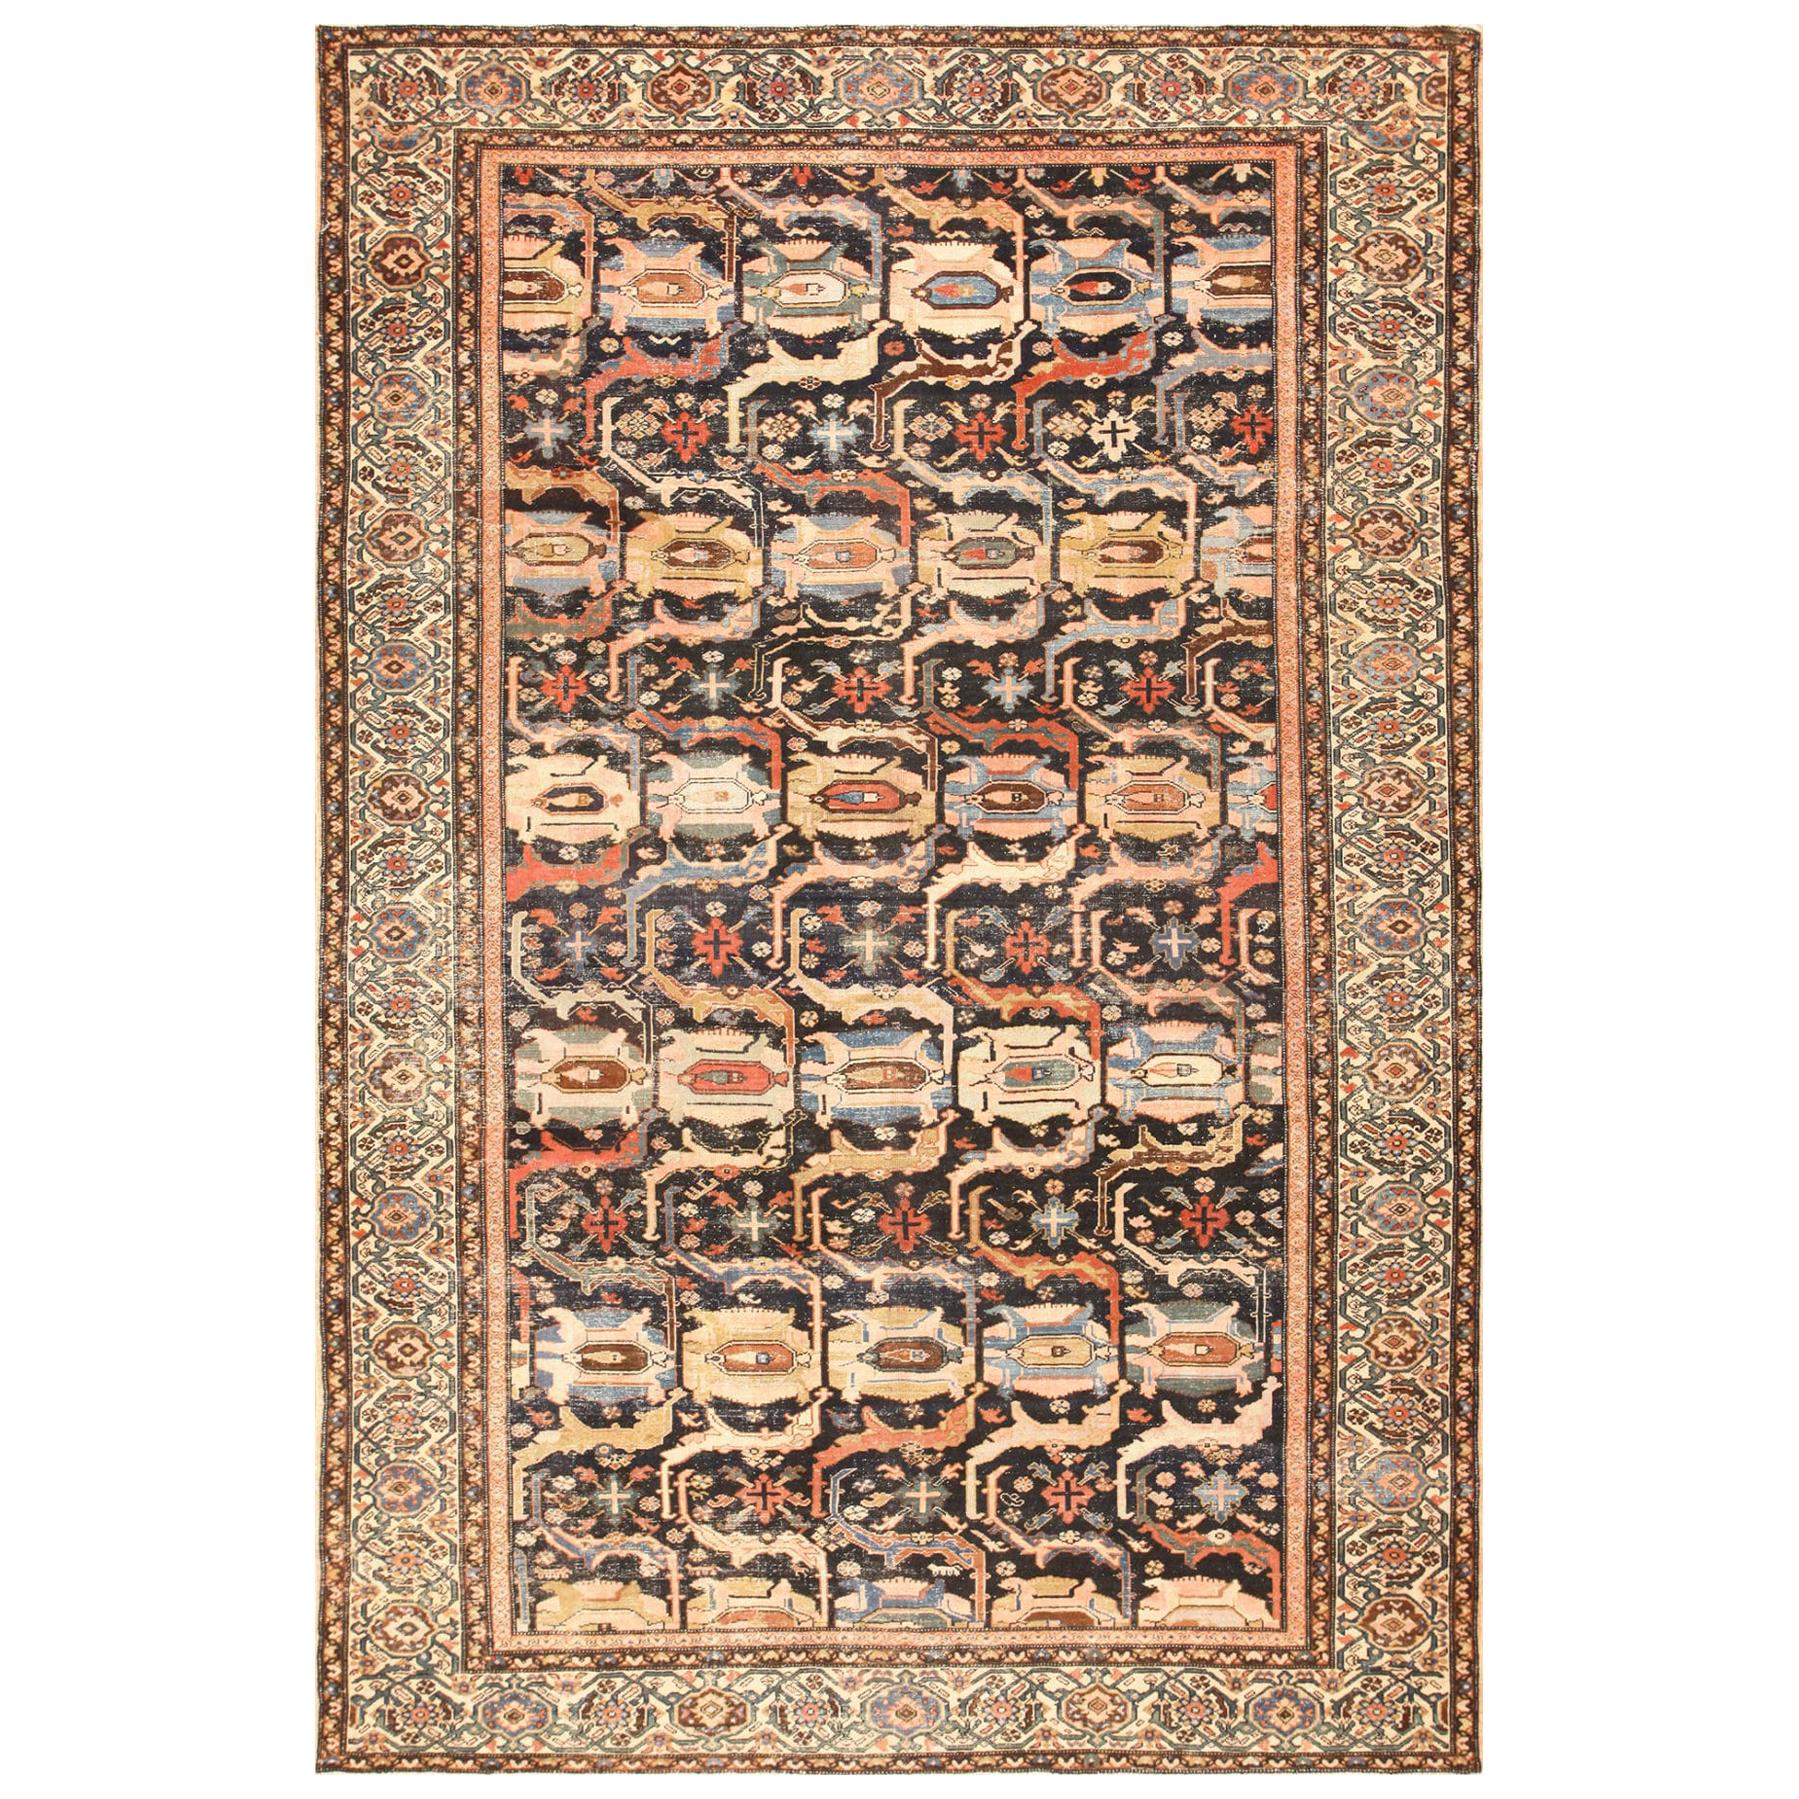 Antique Shabby Chic Persian Malayer Rug. Size: 8 ft 6 in x 12 ft 9 in